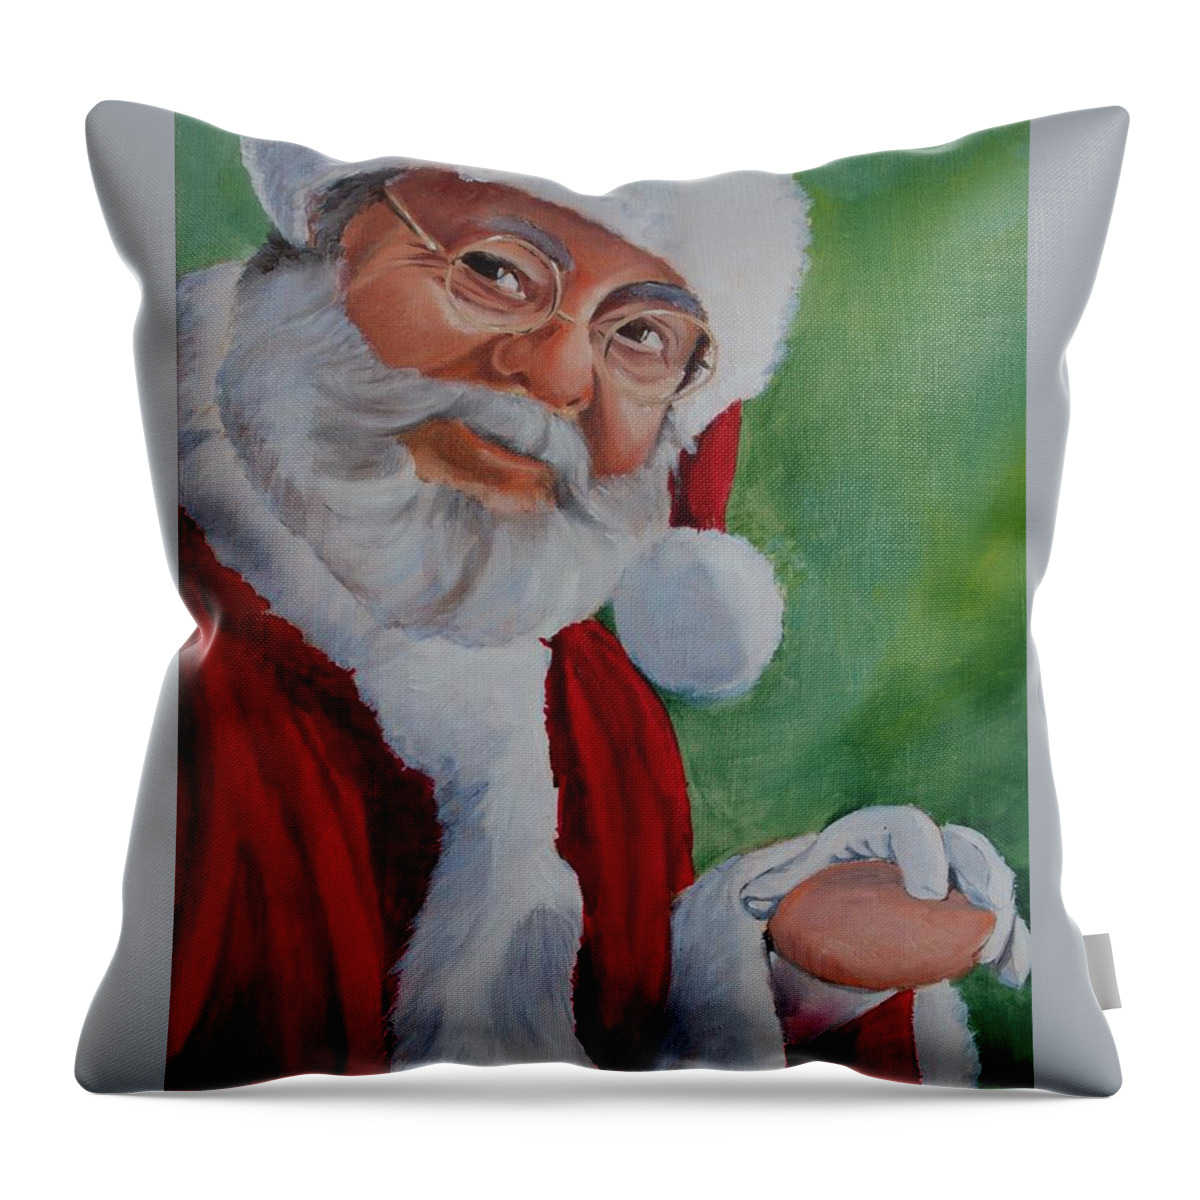 Christmas Throw Pillow featuring the painting Santa 2012 by Teresa Smith